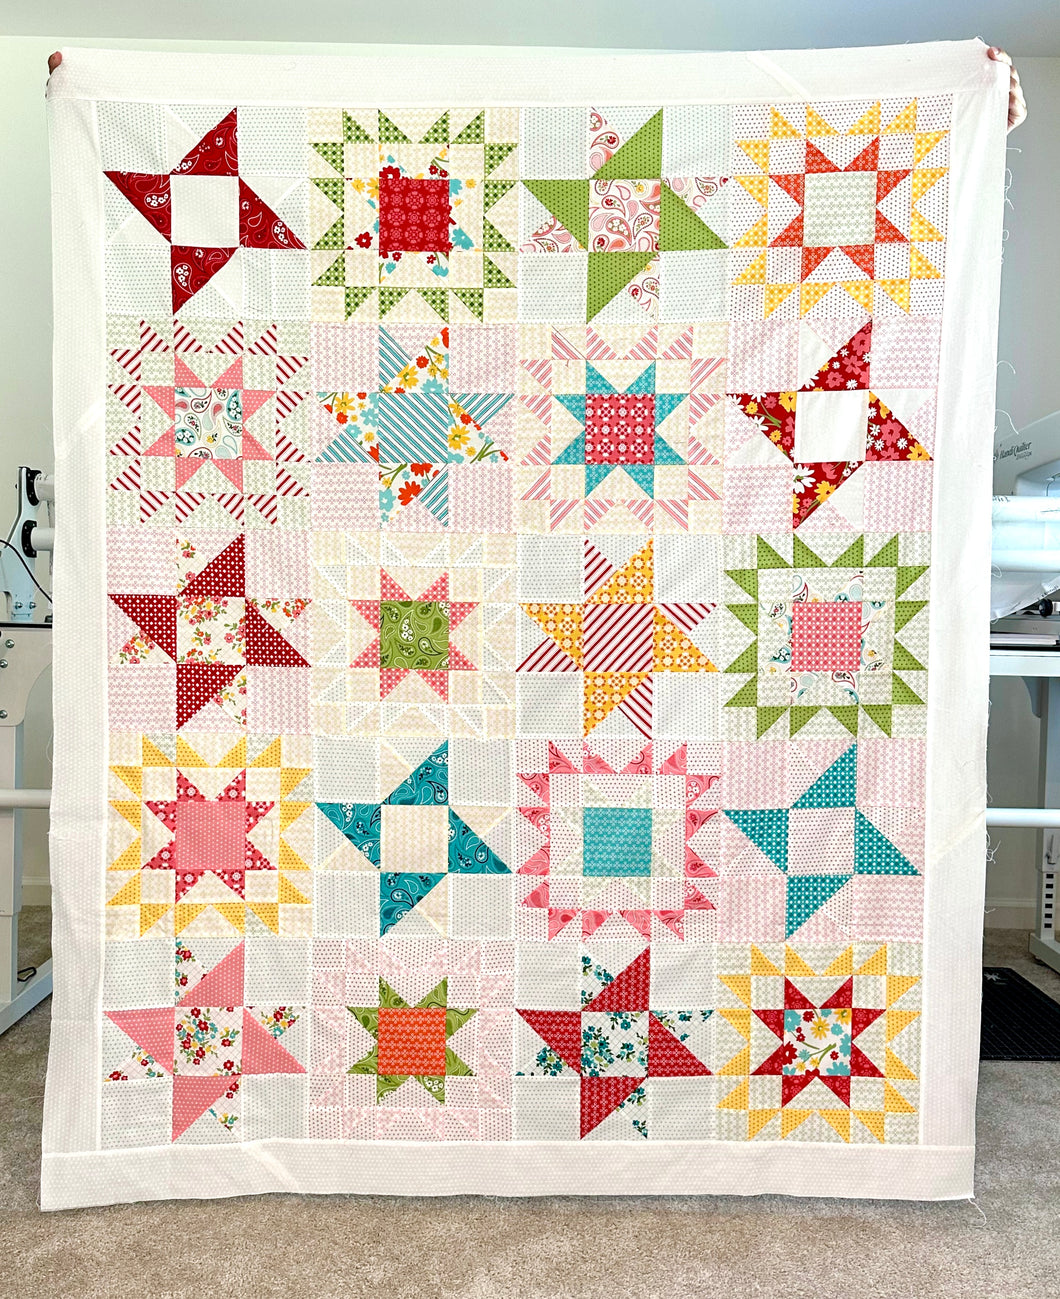 Sampler Throw Size Quilt Top by Sewcial Stitch FREE SHIPPING